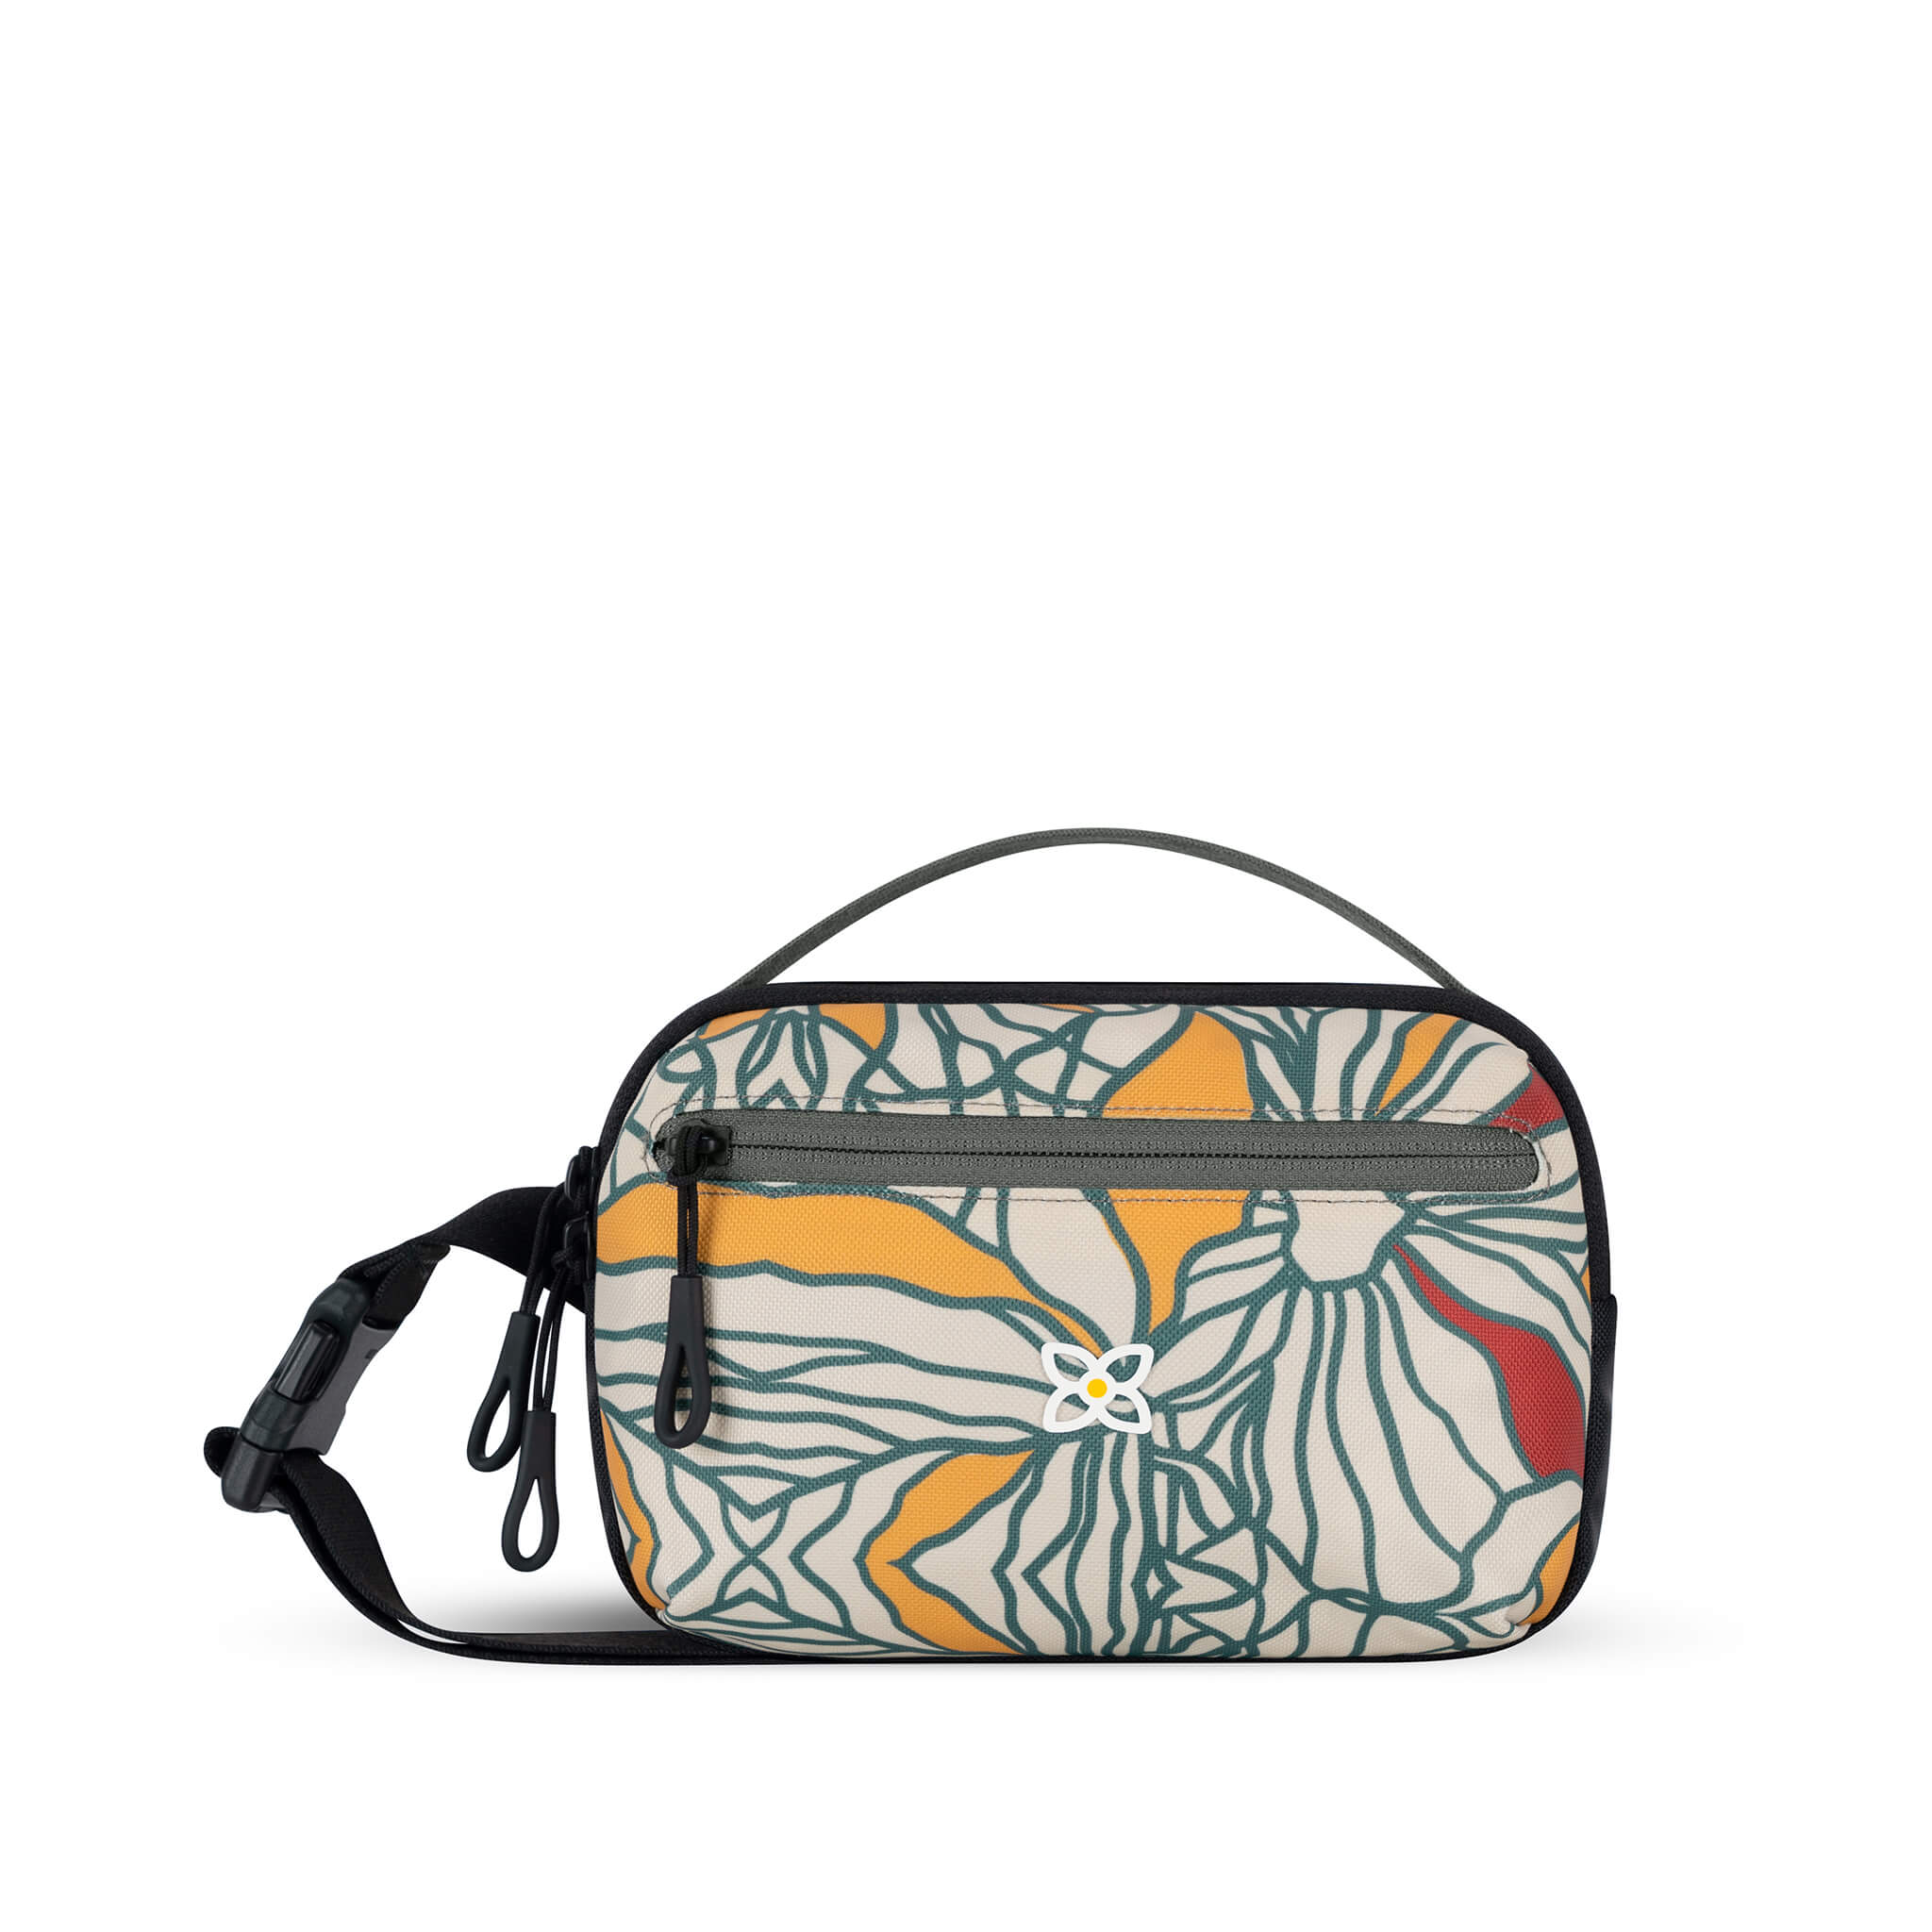 Flat front view of Sherpani hip pack, the Hyk in Fiori. Hyk features include an adjustable waist strap, two external zipper pockets, an internal zipper pocket and RFID-blocking technology to block cyber theft. The Fiori colorway is a floral pattern with red accents.